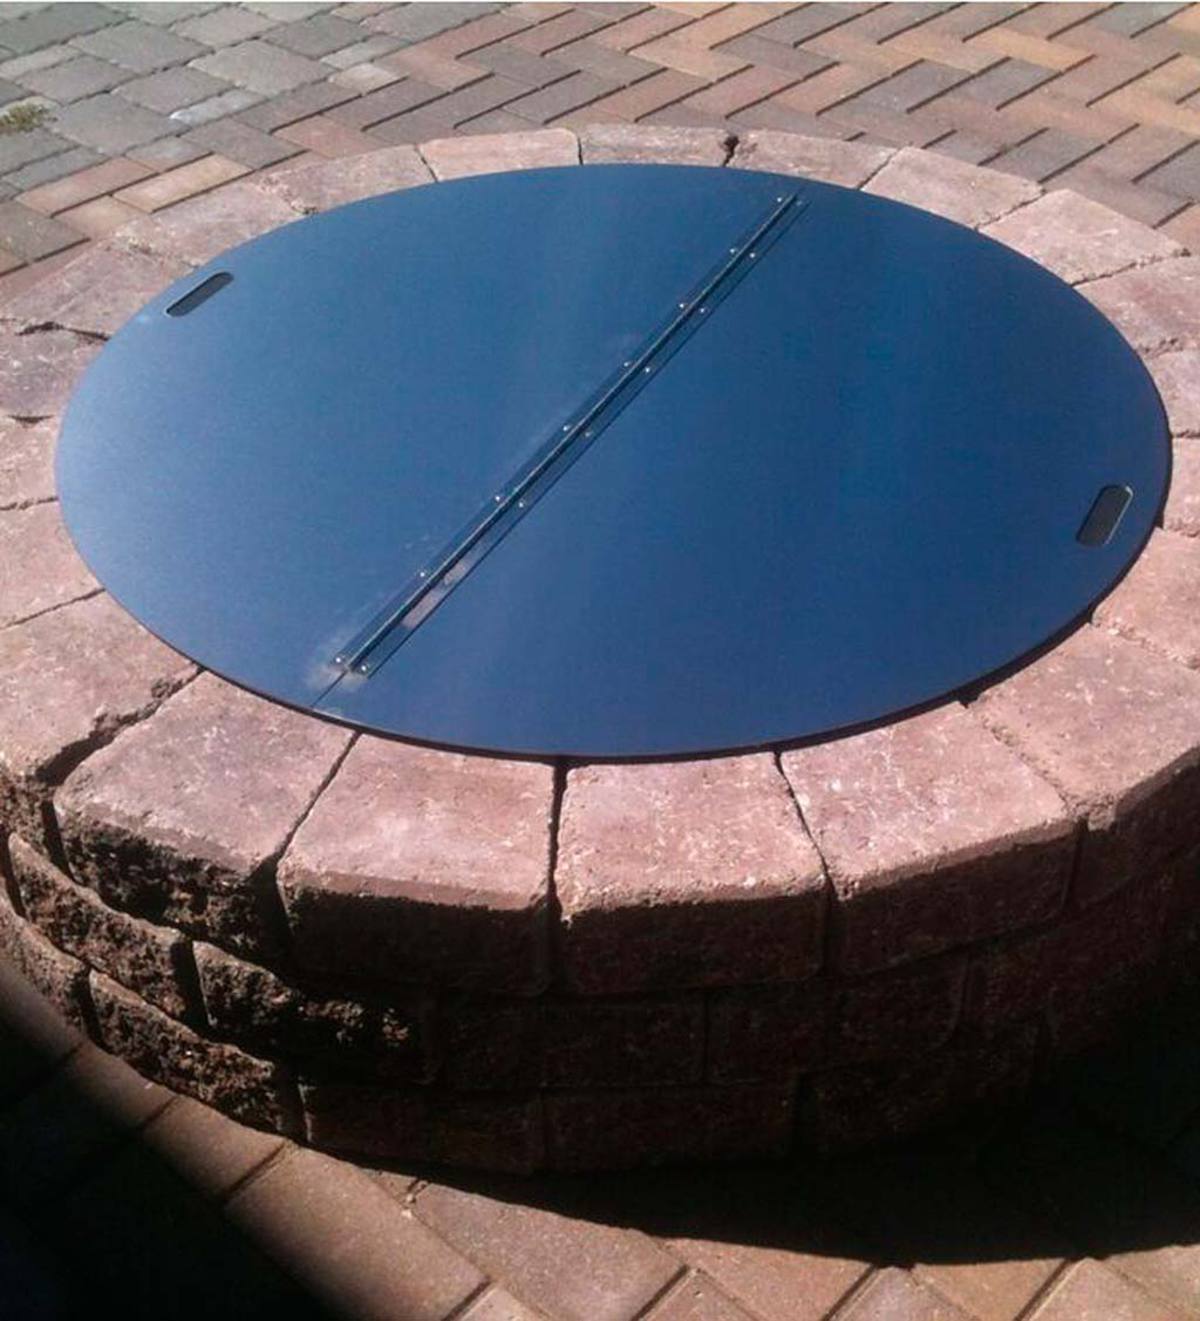 Stainless Steel Round Fire Pit Cover, Built In Fire Pit Covers